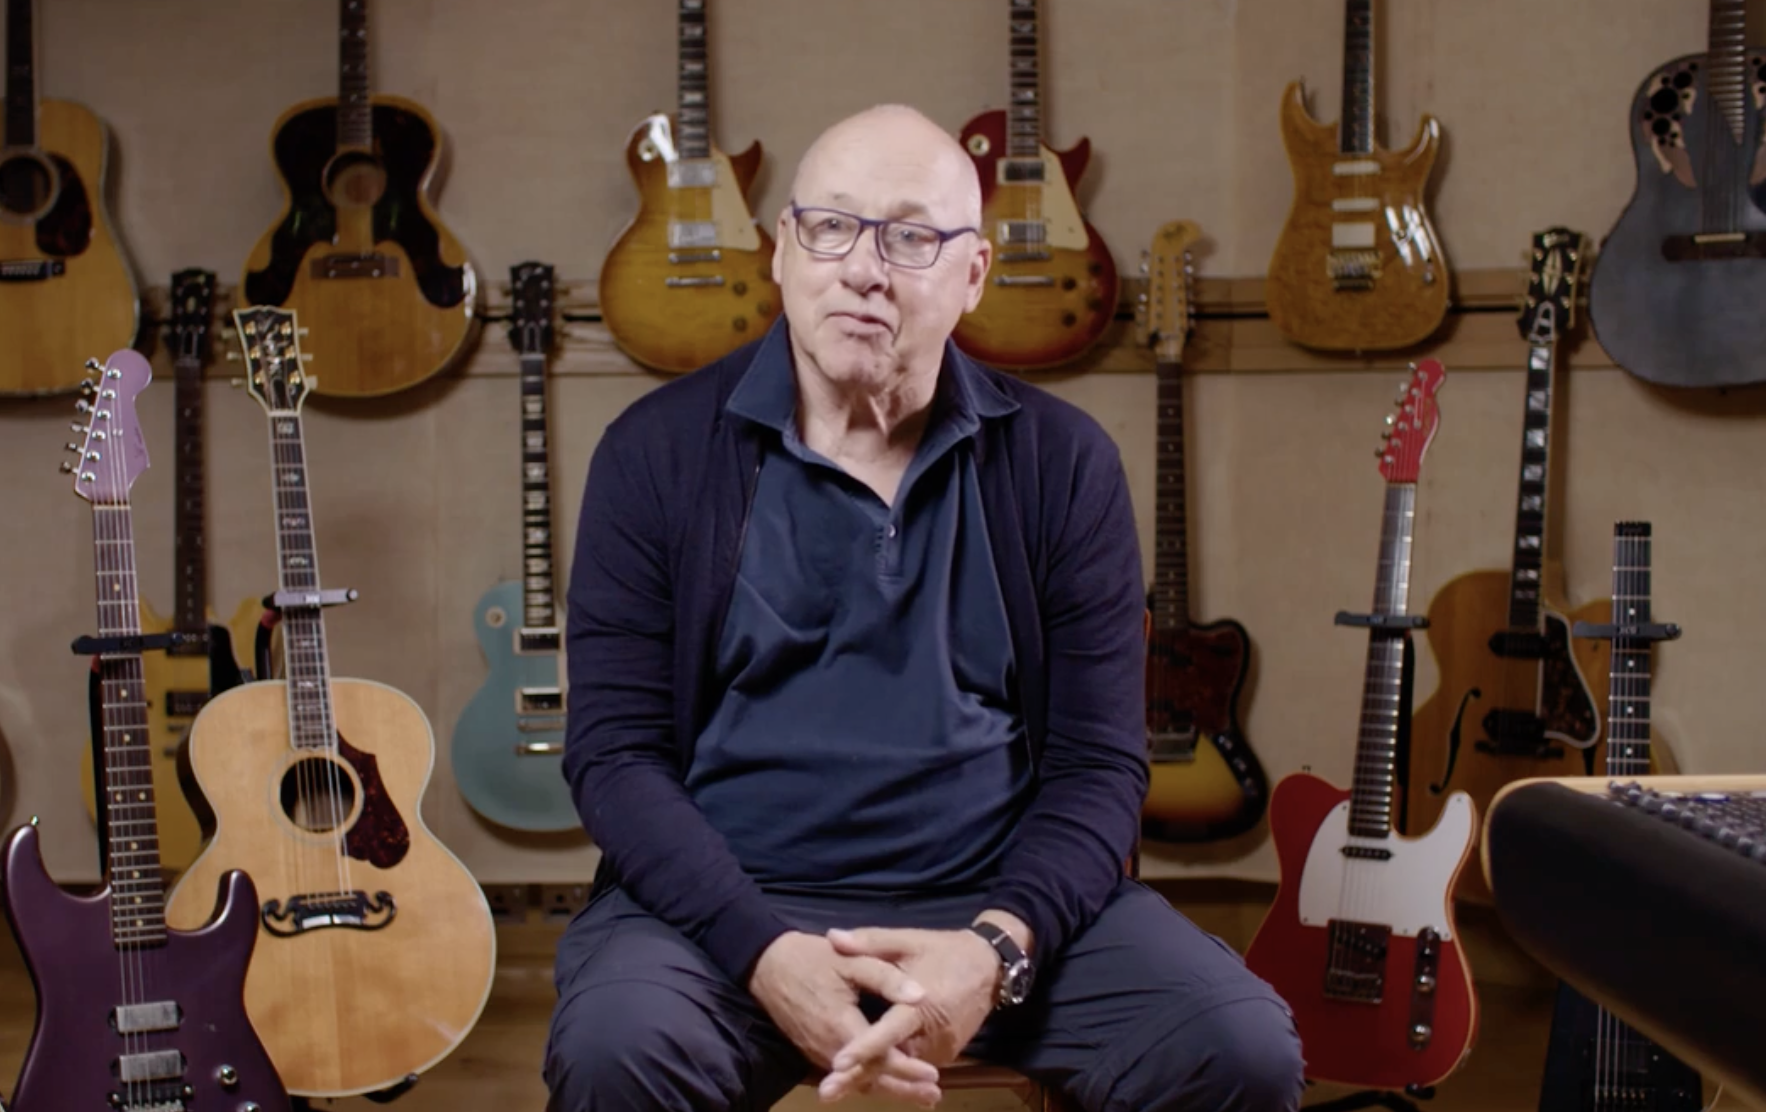 Dire Straits' Mark Knopfler puts more than 120 guitars up for auction - CGTN